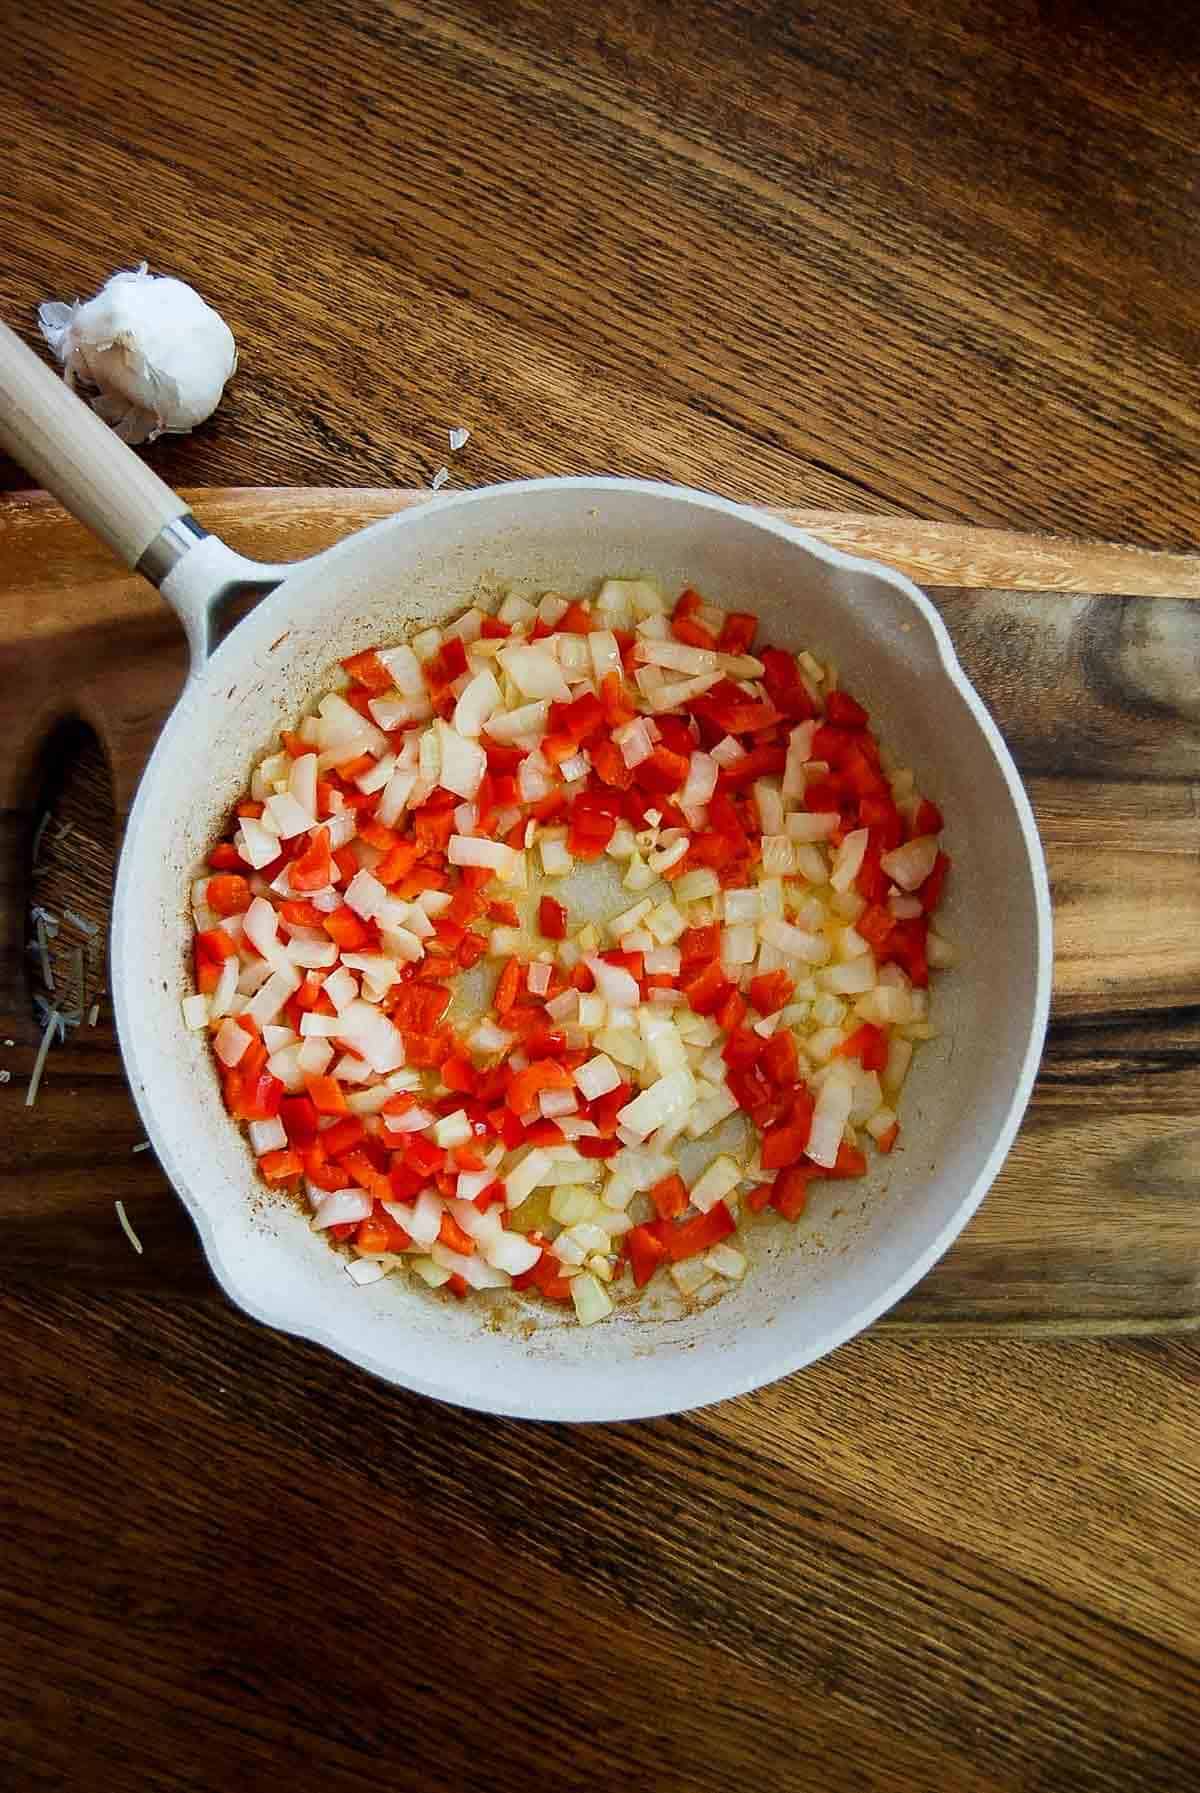 sautéed red pepper and onion.